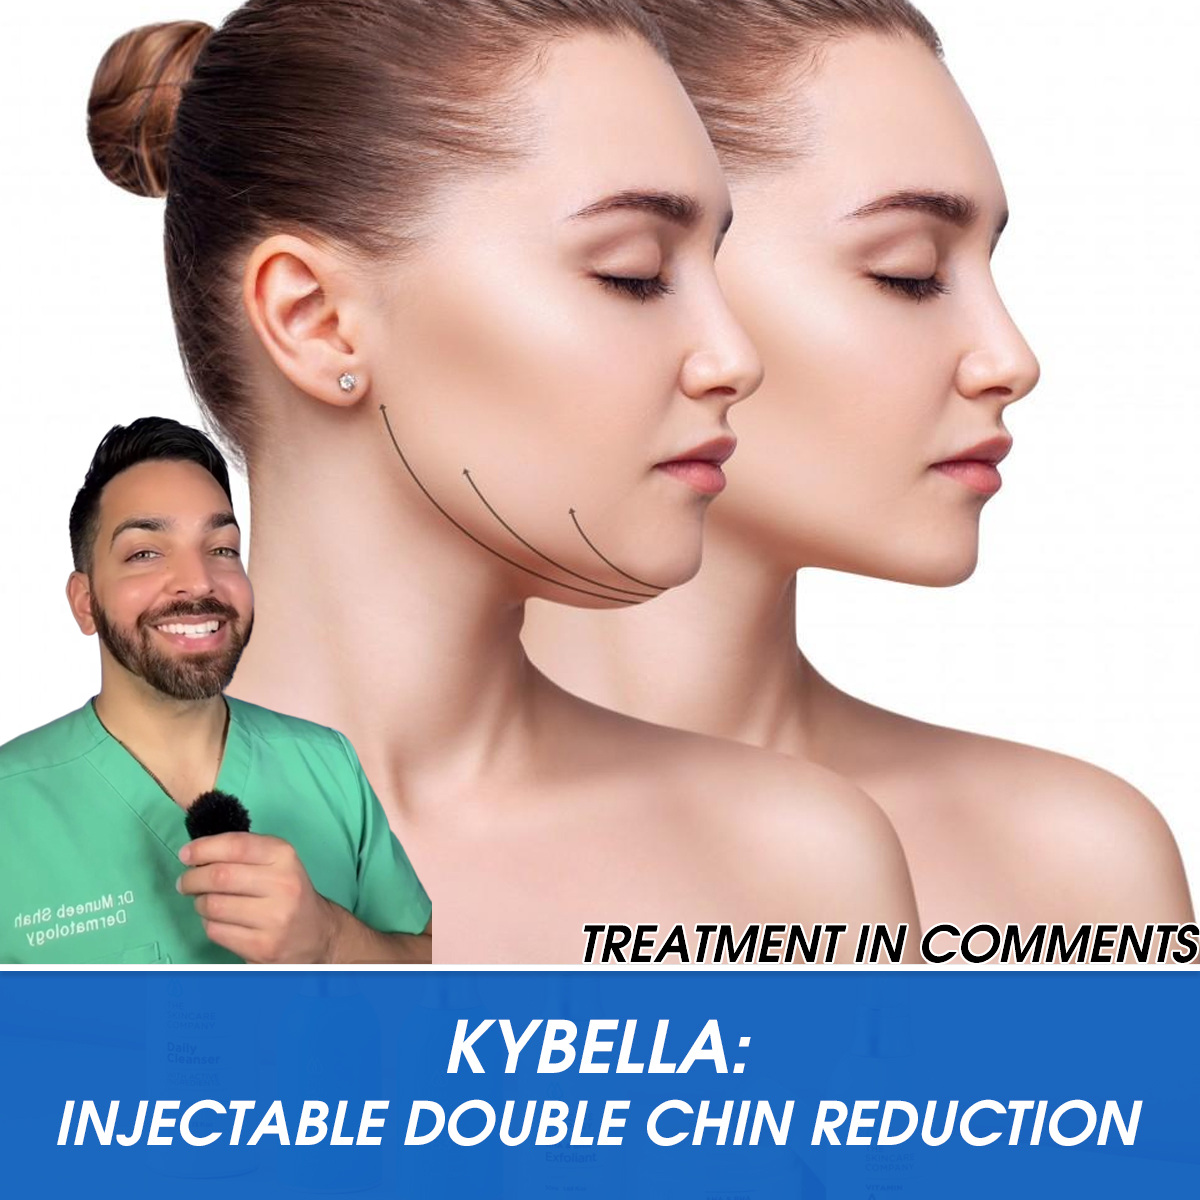 Kybella: Injectable Double Chin Reduction